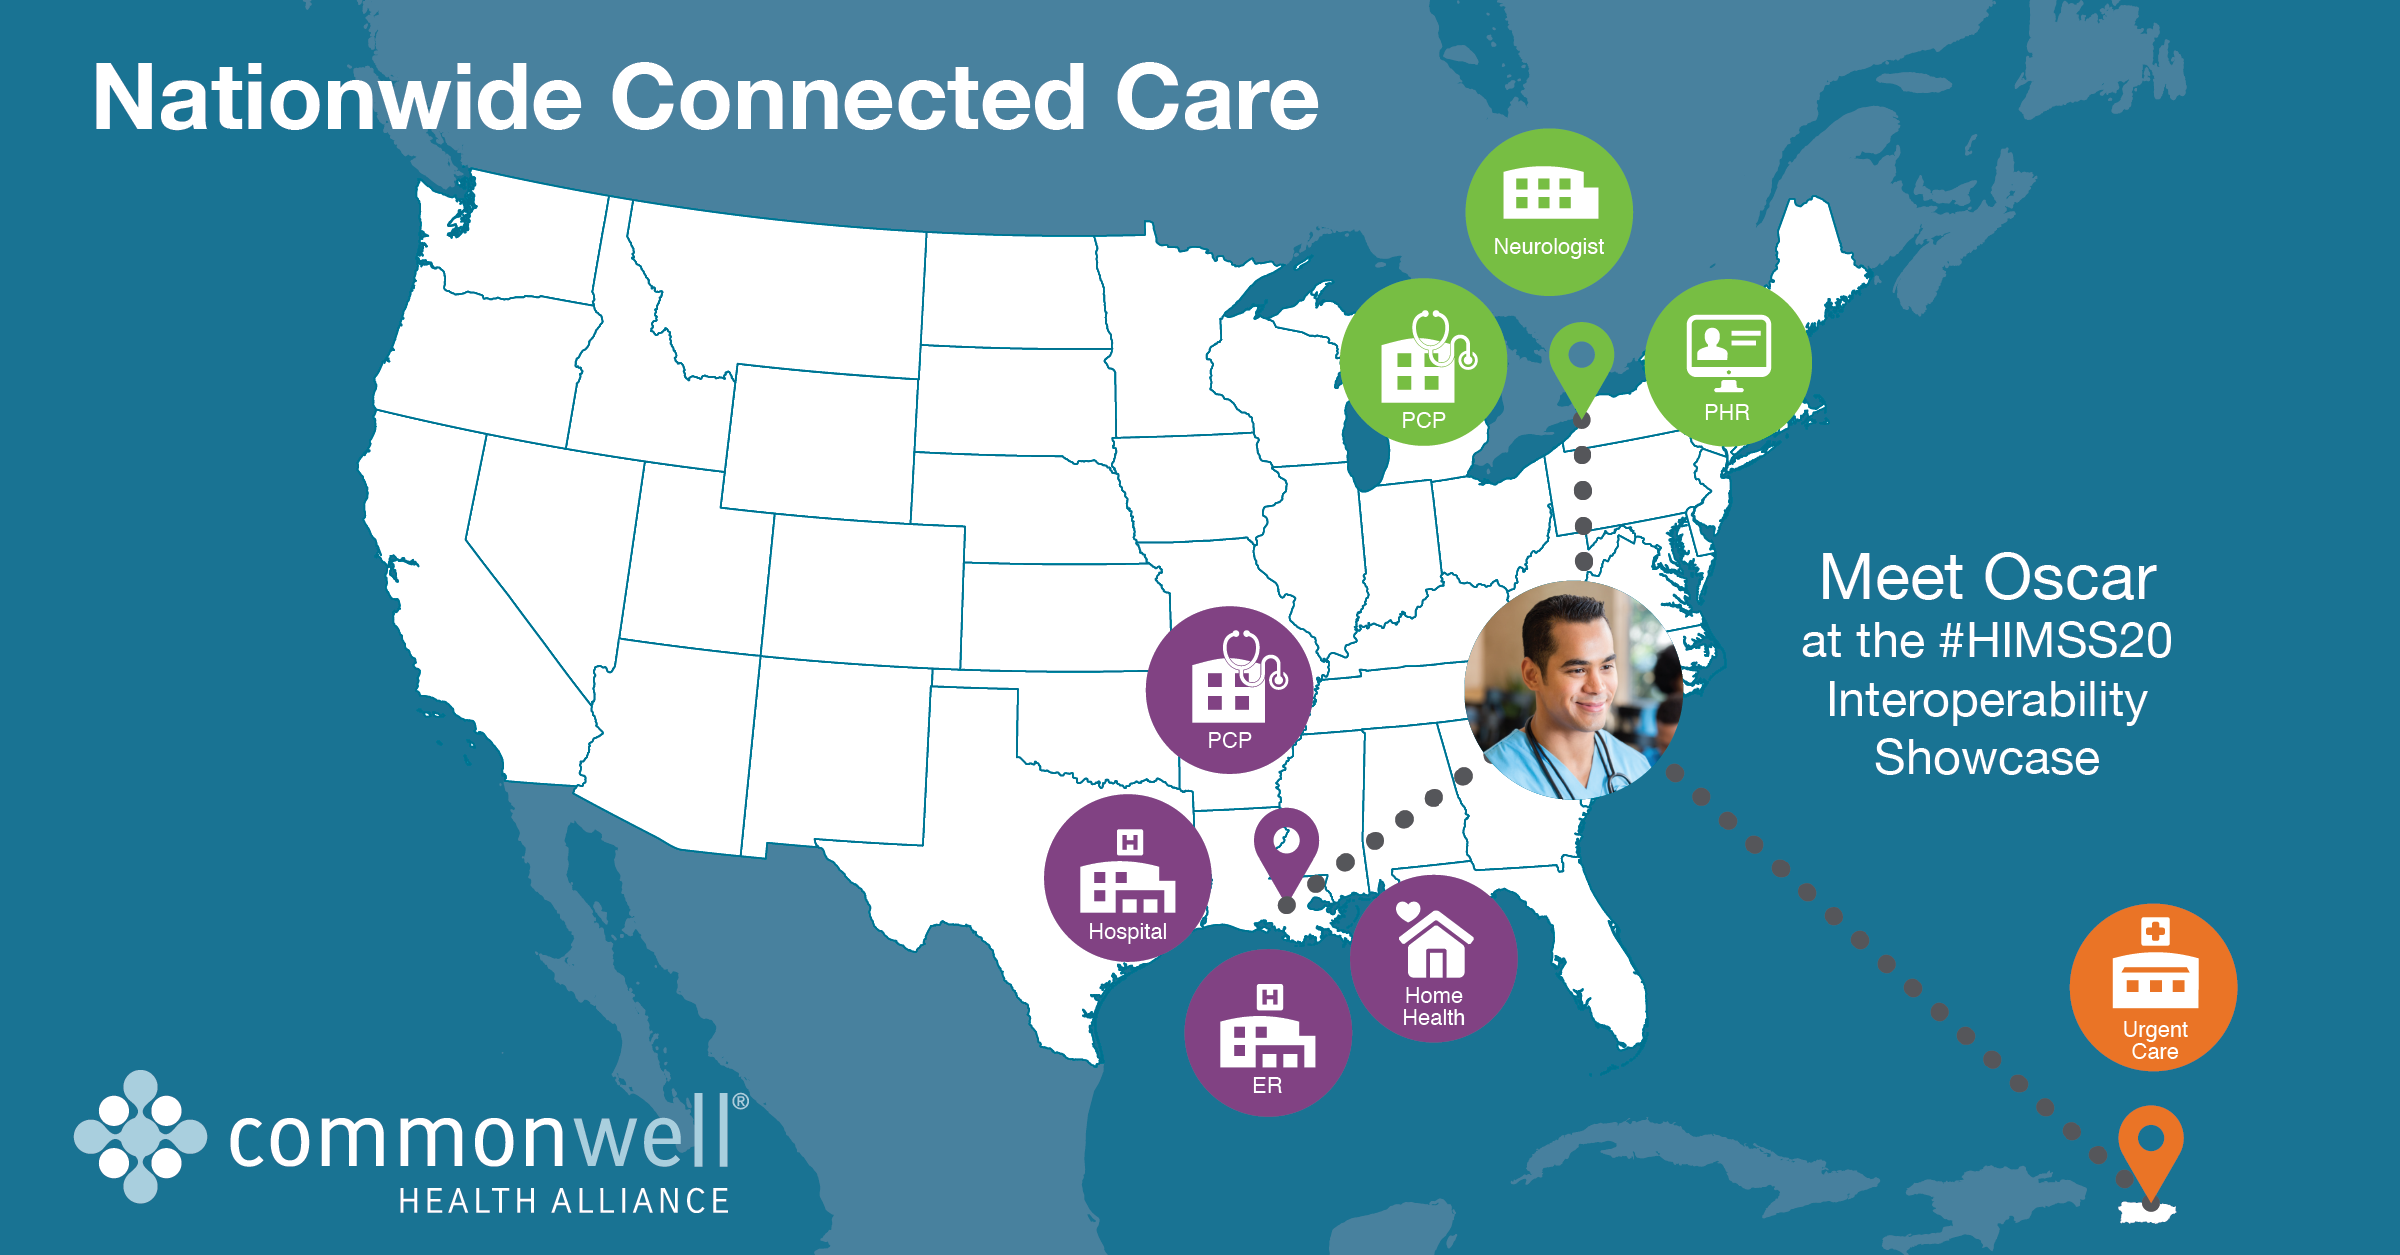 CommonWell Service Demonstrations at the HIMSS20 Interoperability